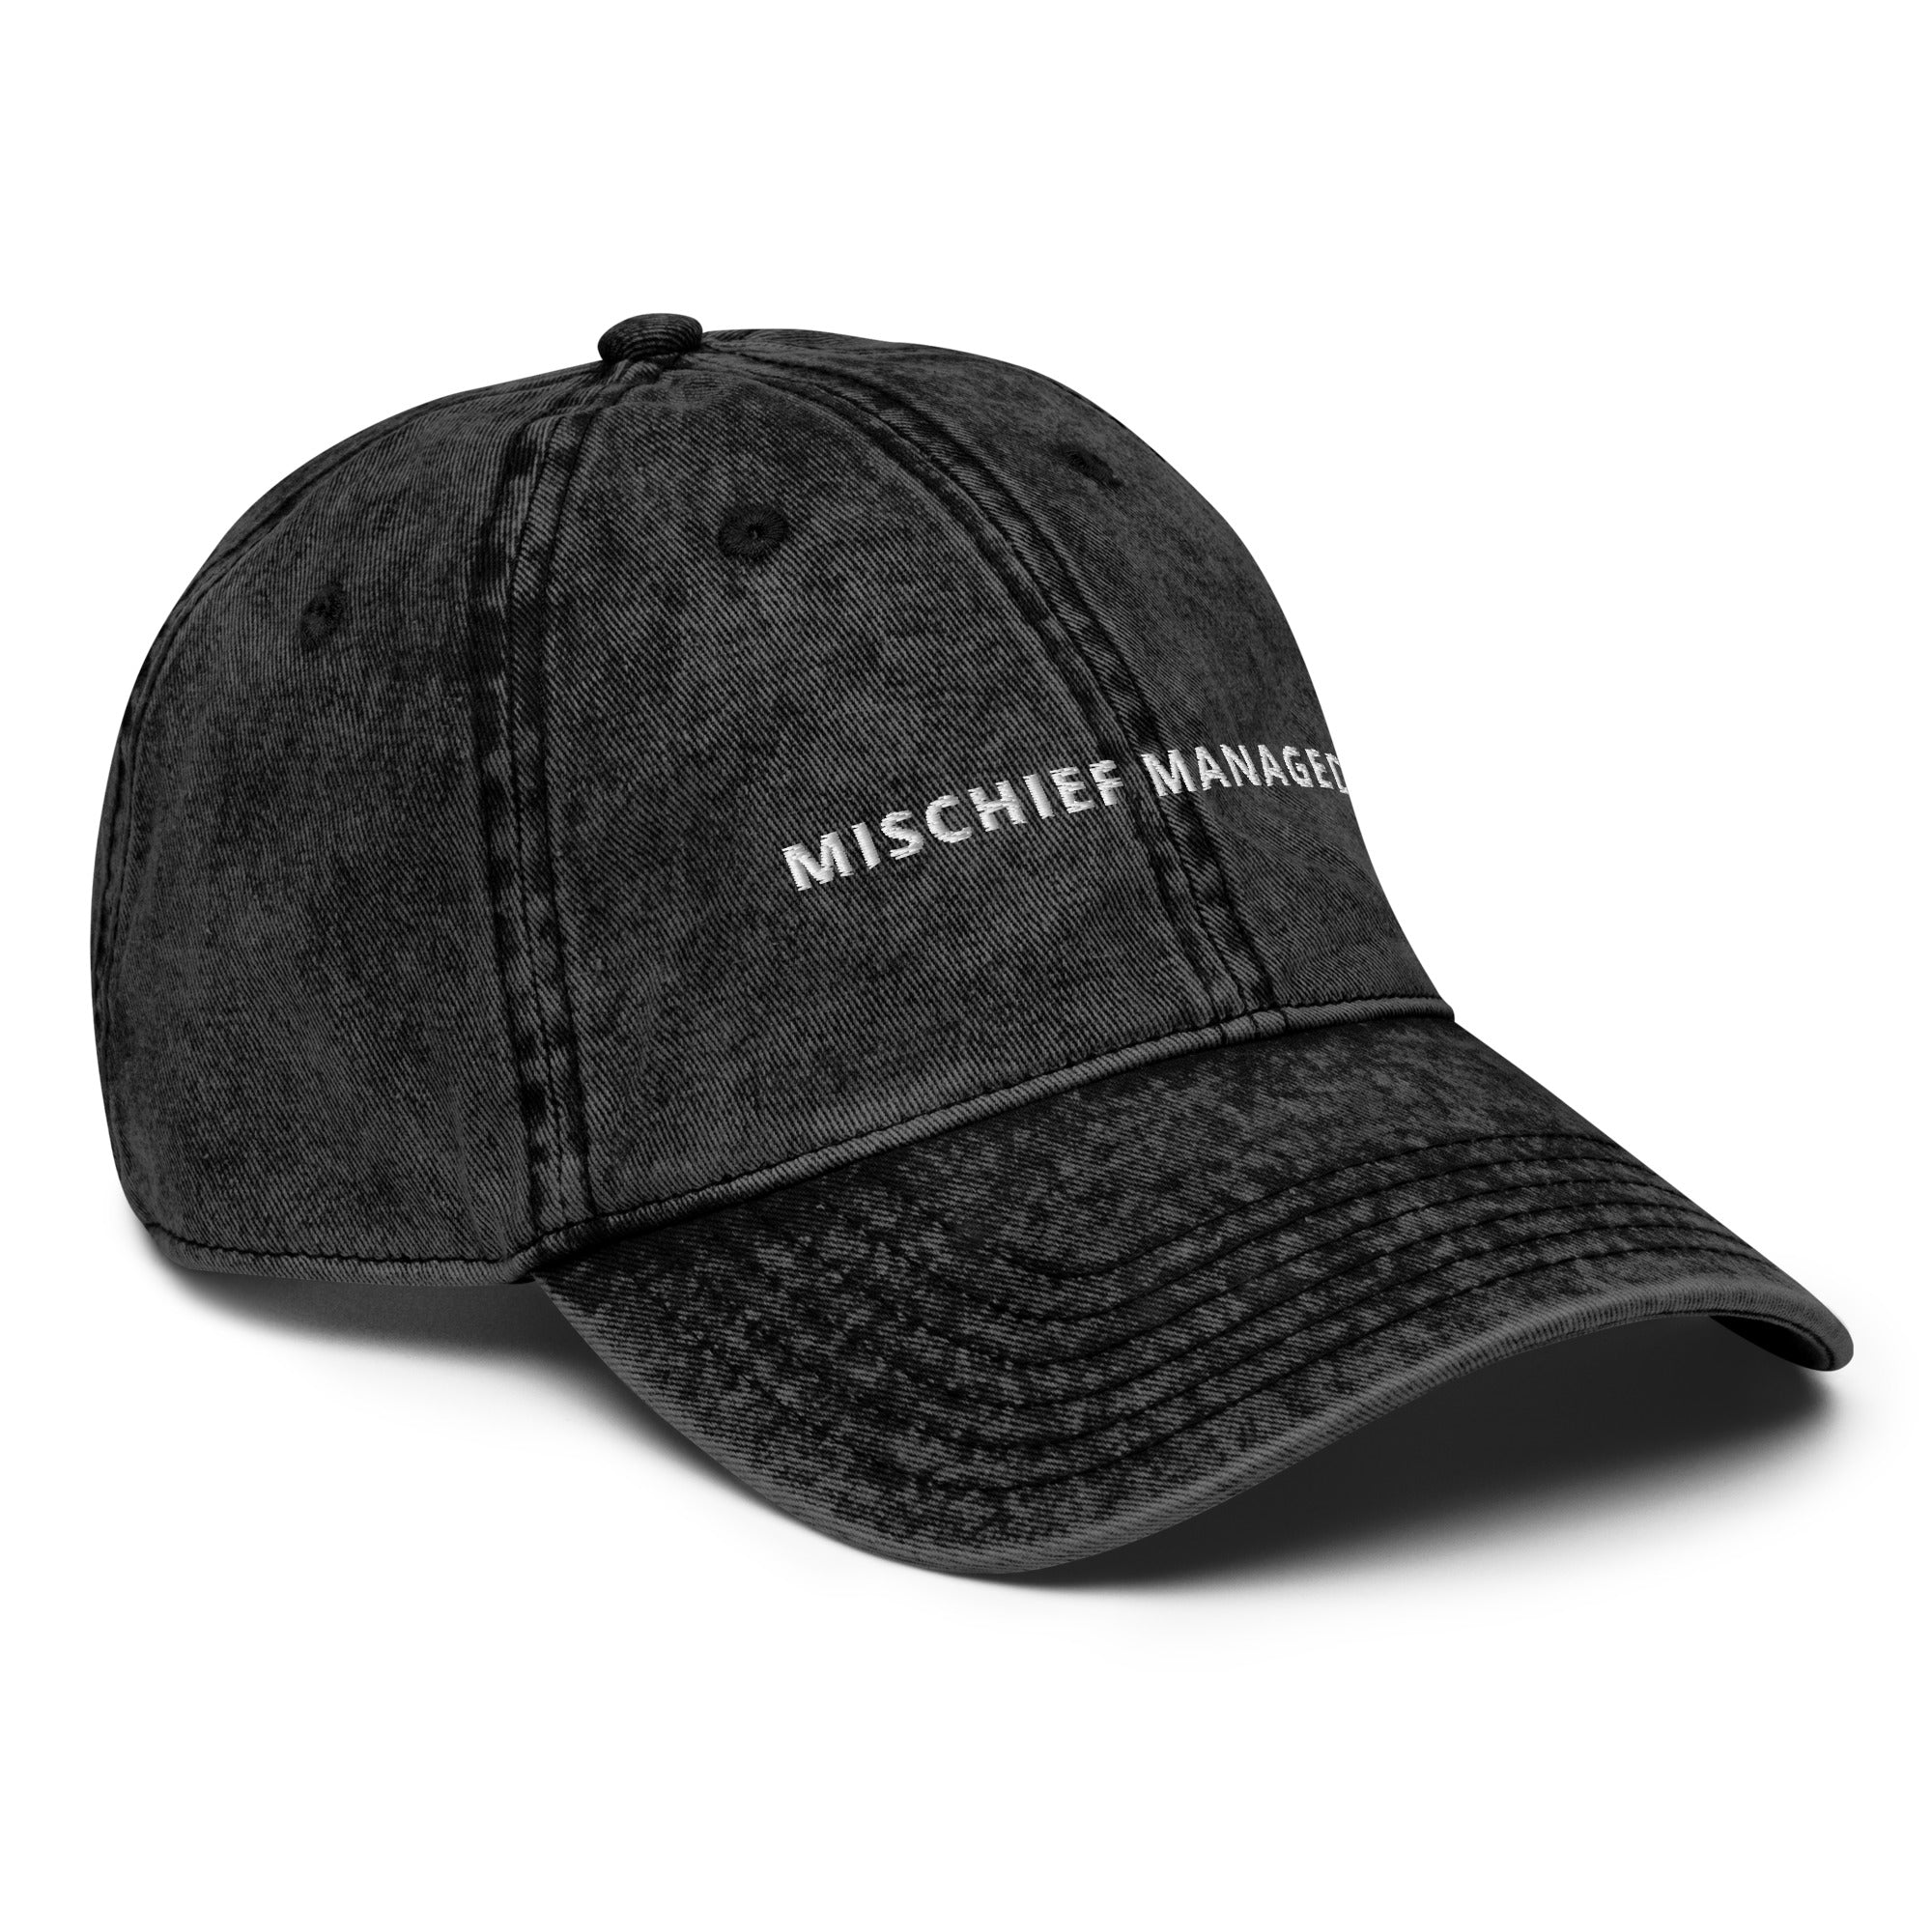 Mischief Managed – Really Good Hats